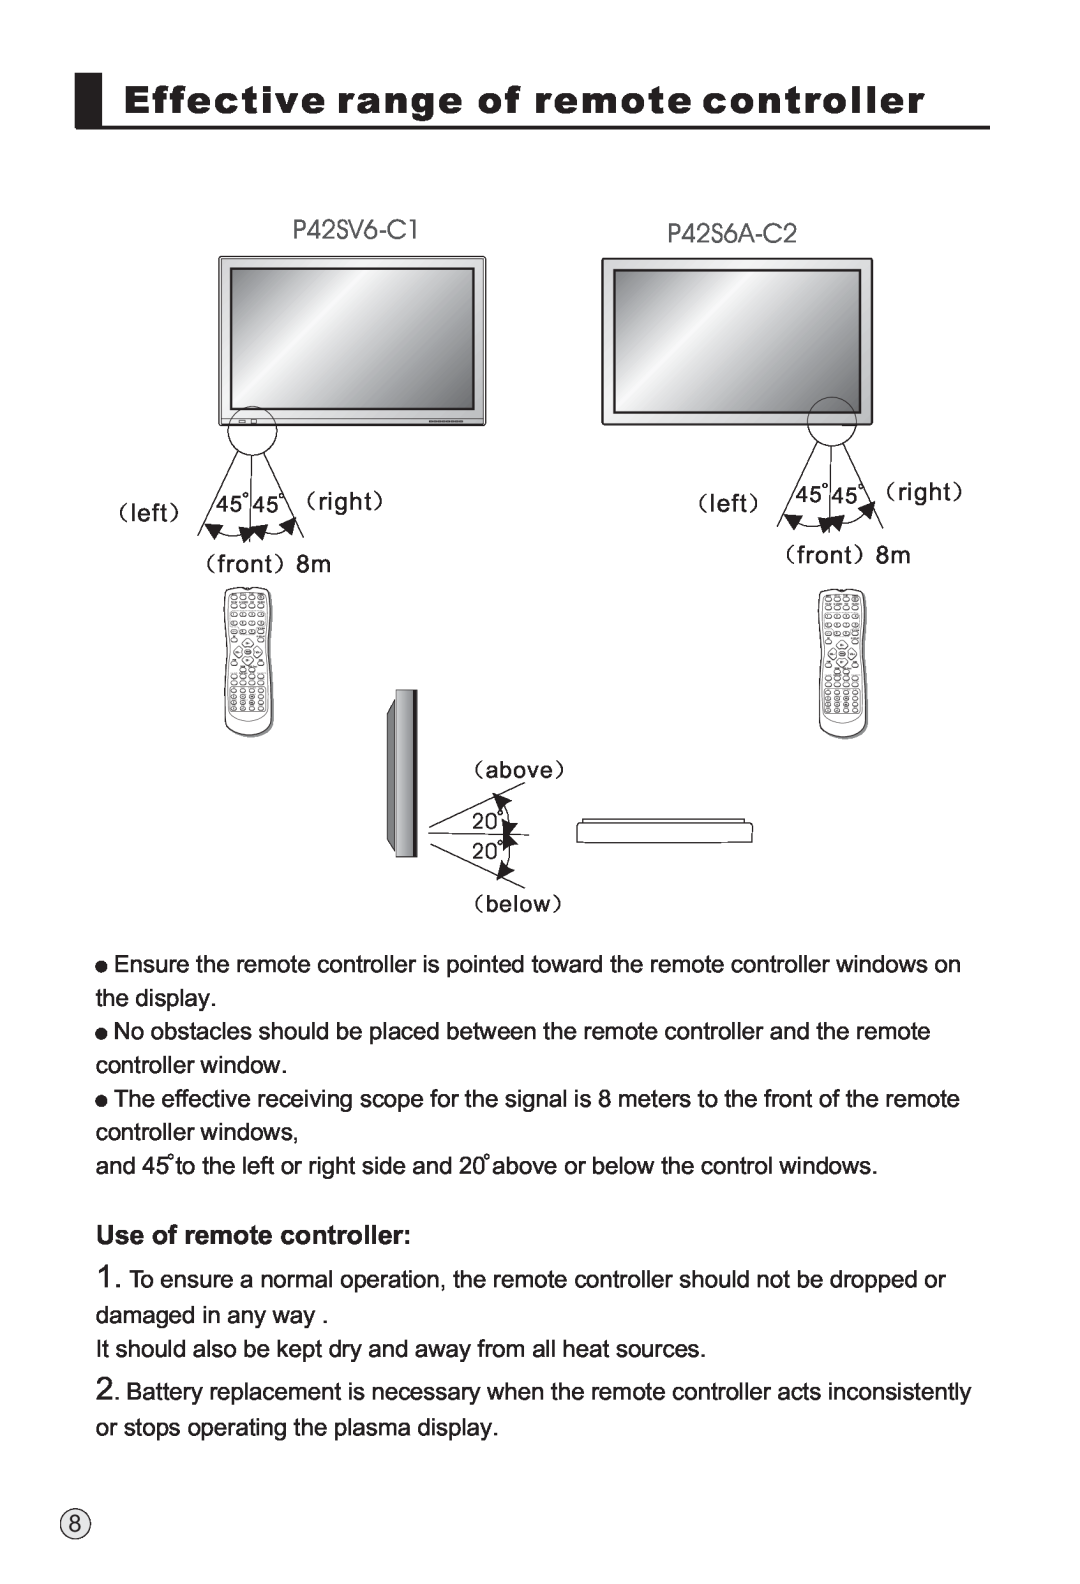 Haier owner manual P42SV6-C1P42S6A-C2, Use of remote controller, Effective range of remote controller 